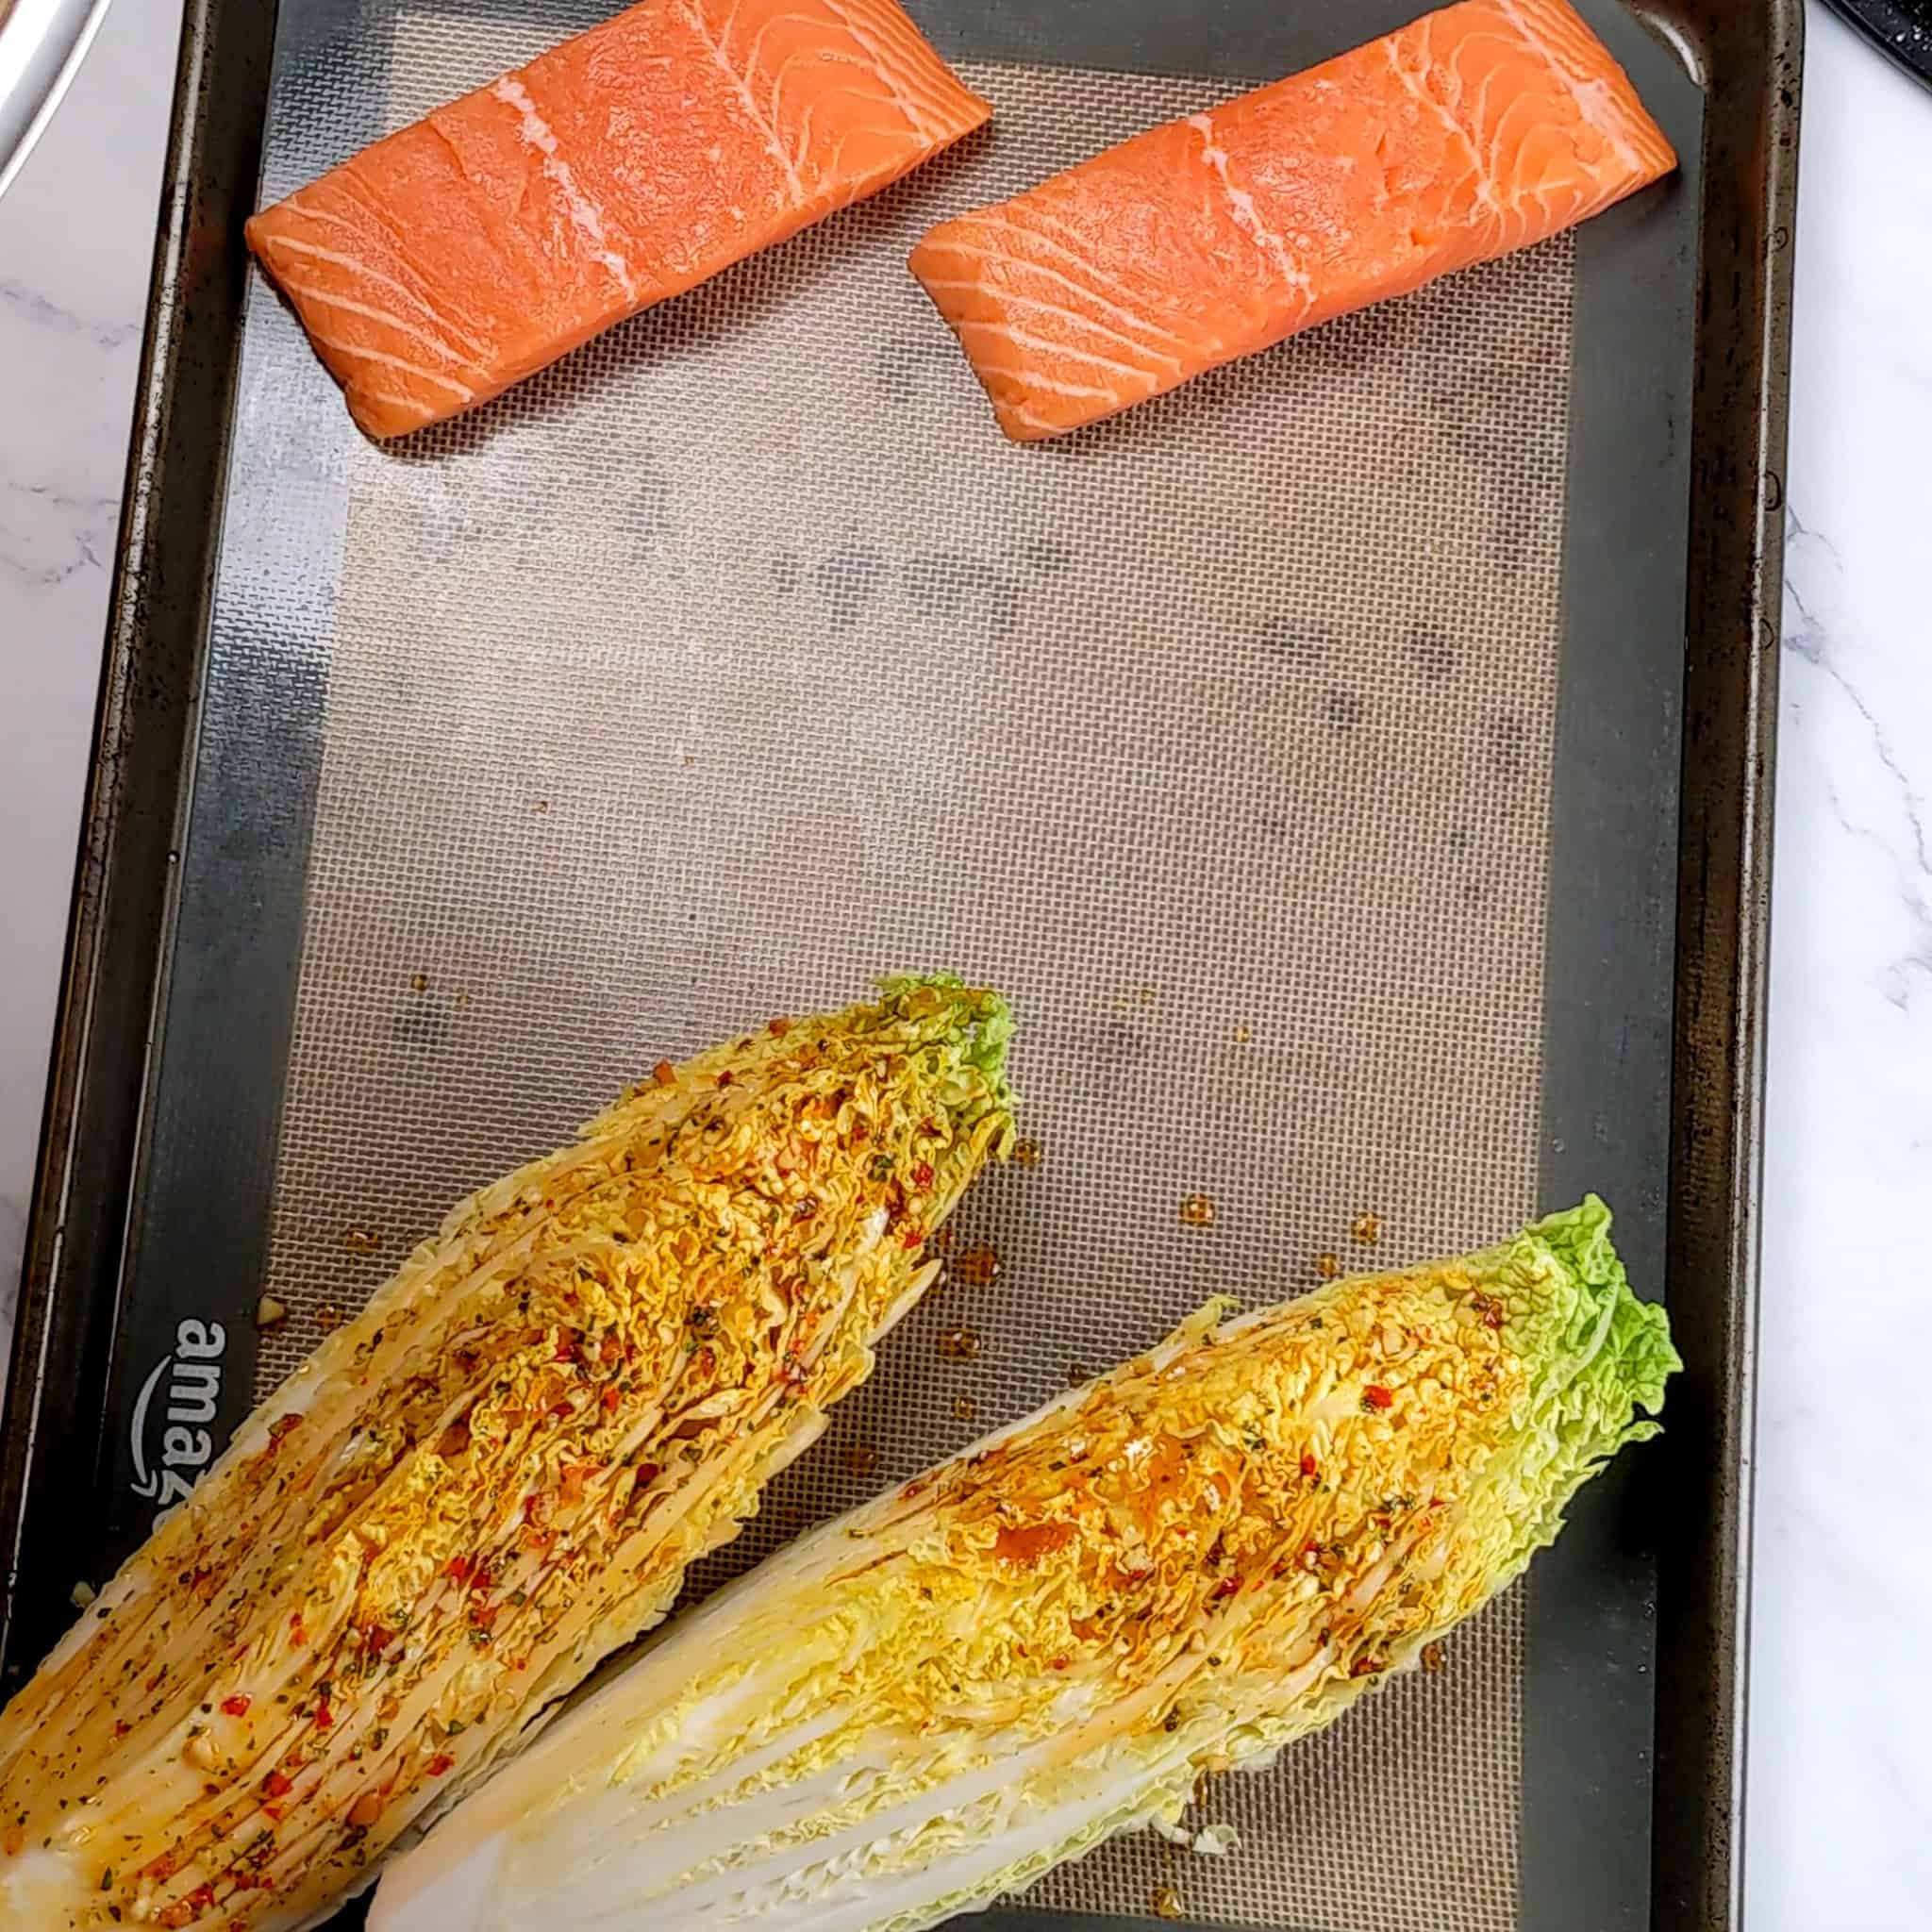 a sheet pan lined with a silicon liner with salmon filets on one side lined vertically on a diagonal and napa cabbage wedges on the other far side in the same manner with some of the wet seasoning on it.